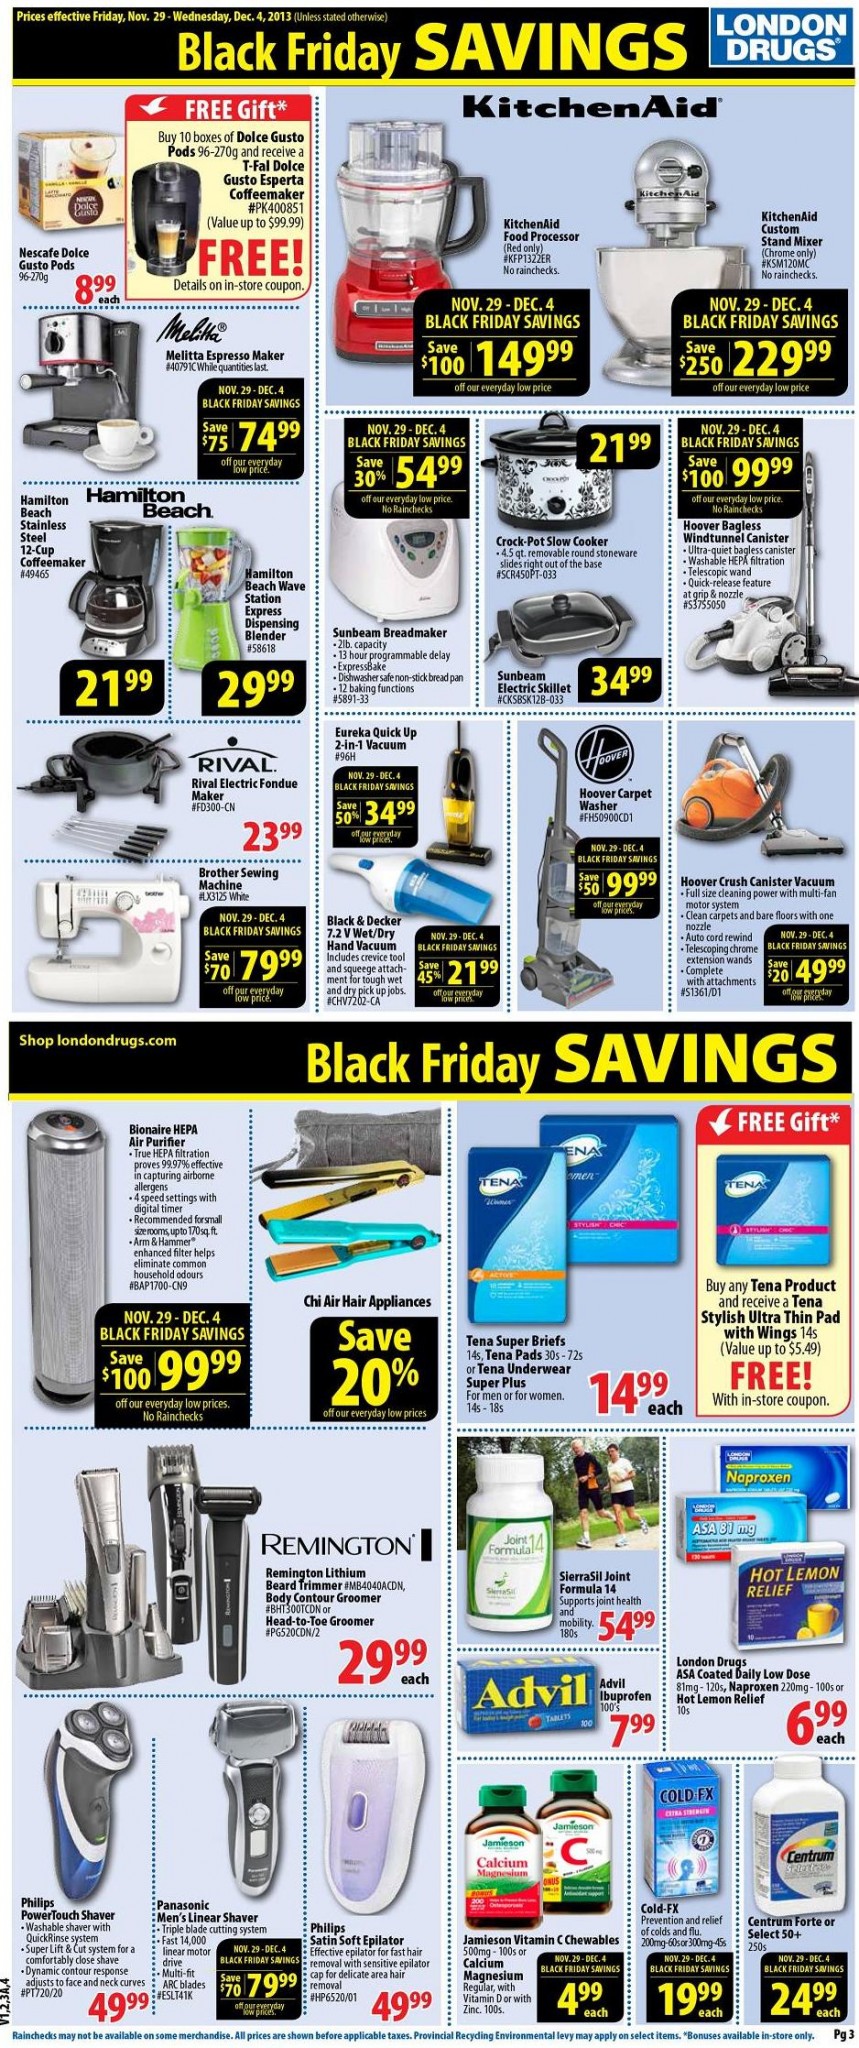 London Drugs Canada Black Friday 2013 Flyer, Sales and Deals › Black Friday Canada